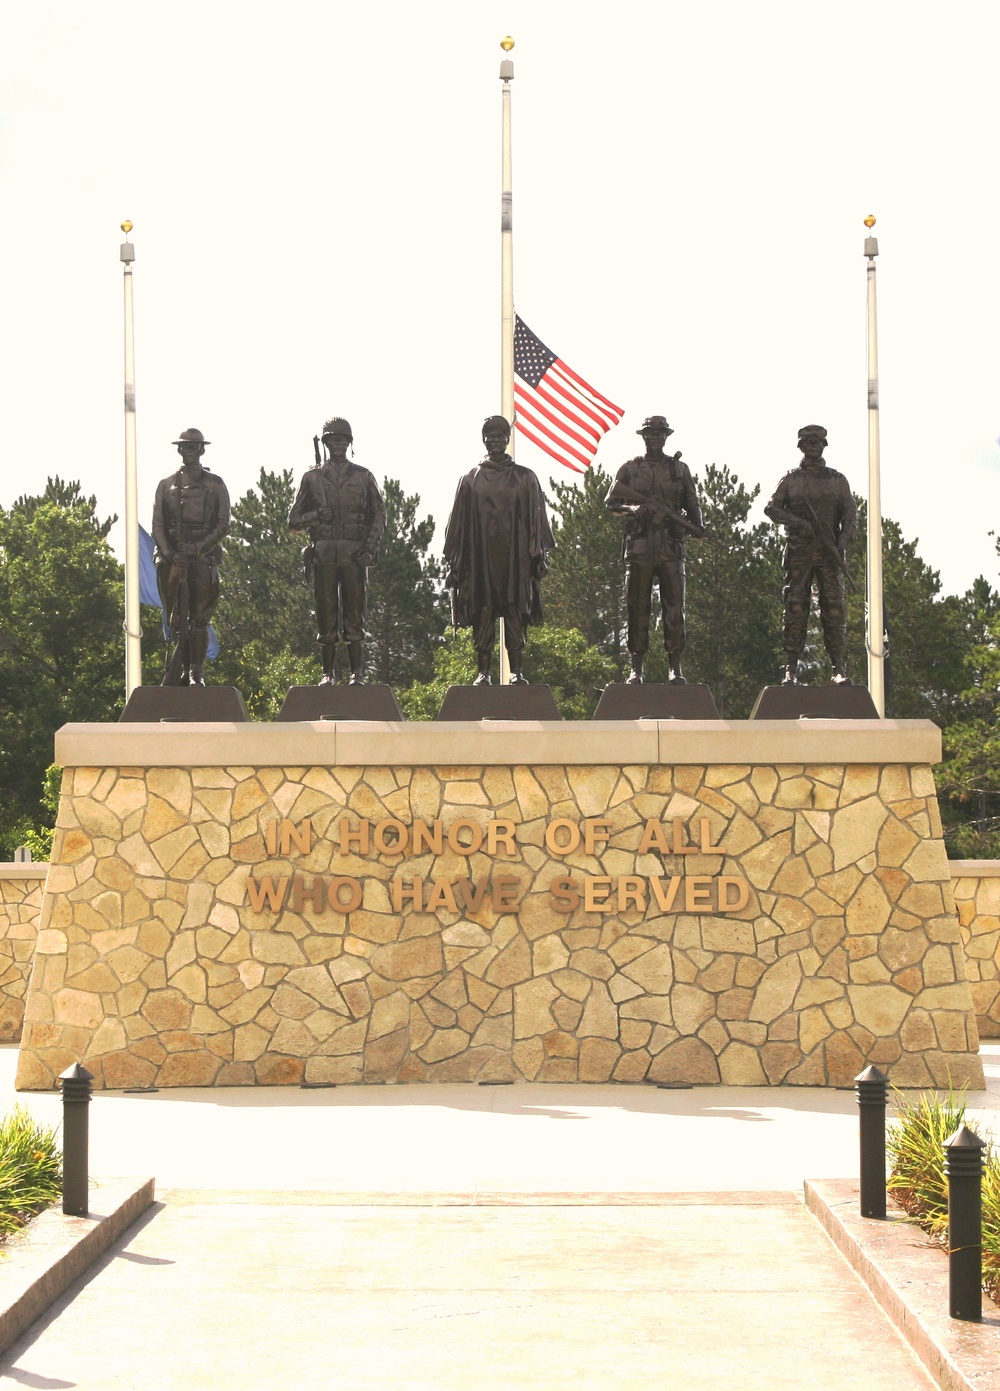 Patriot Day at Fort McCoy's Commemorative Area